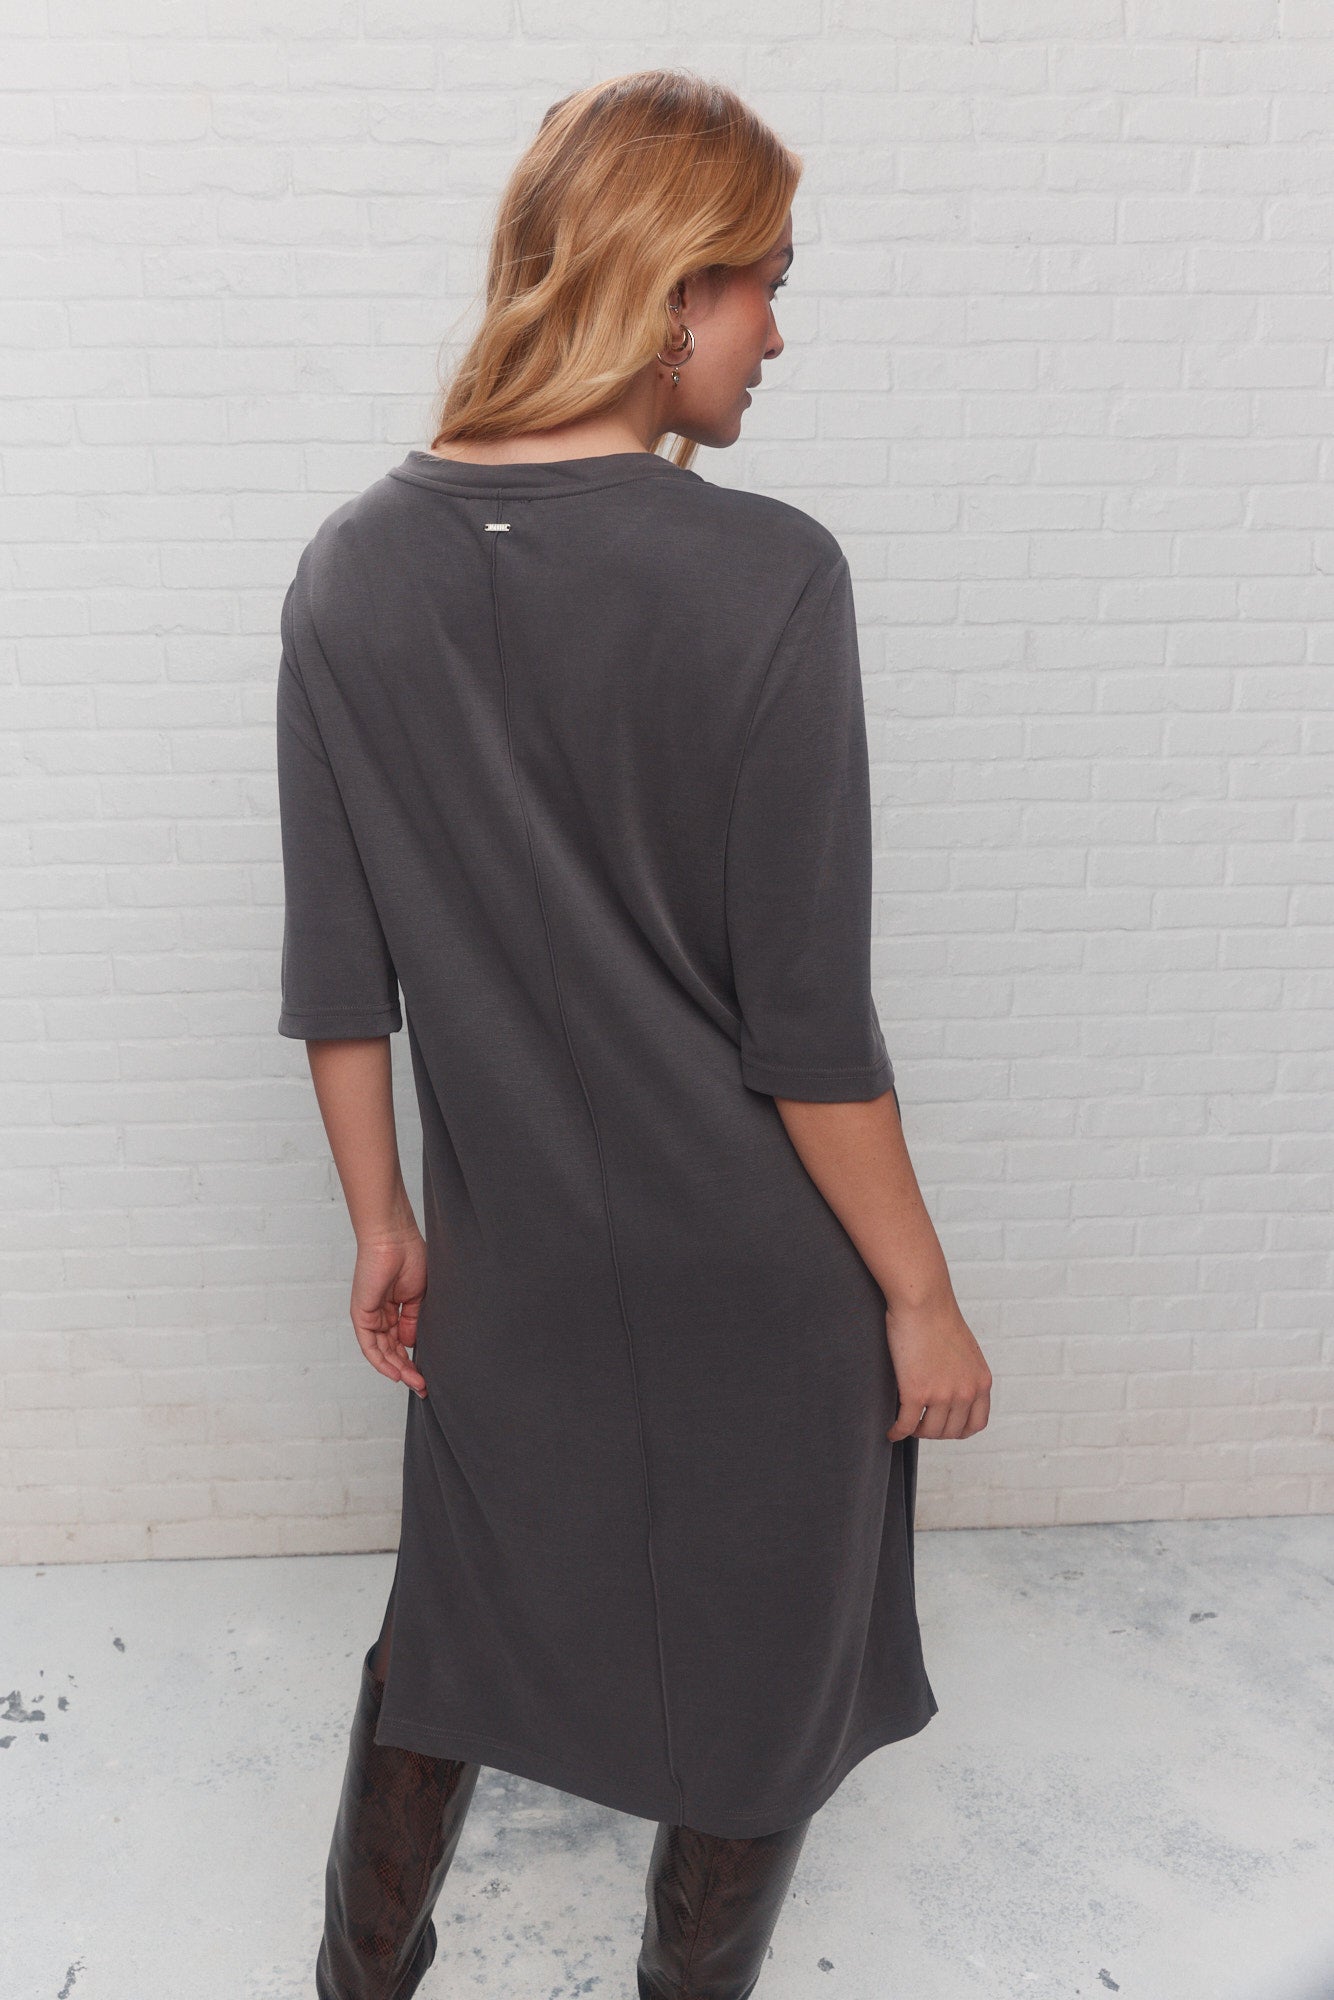 Gray tunic sweater with applied pockets | Henry